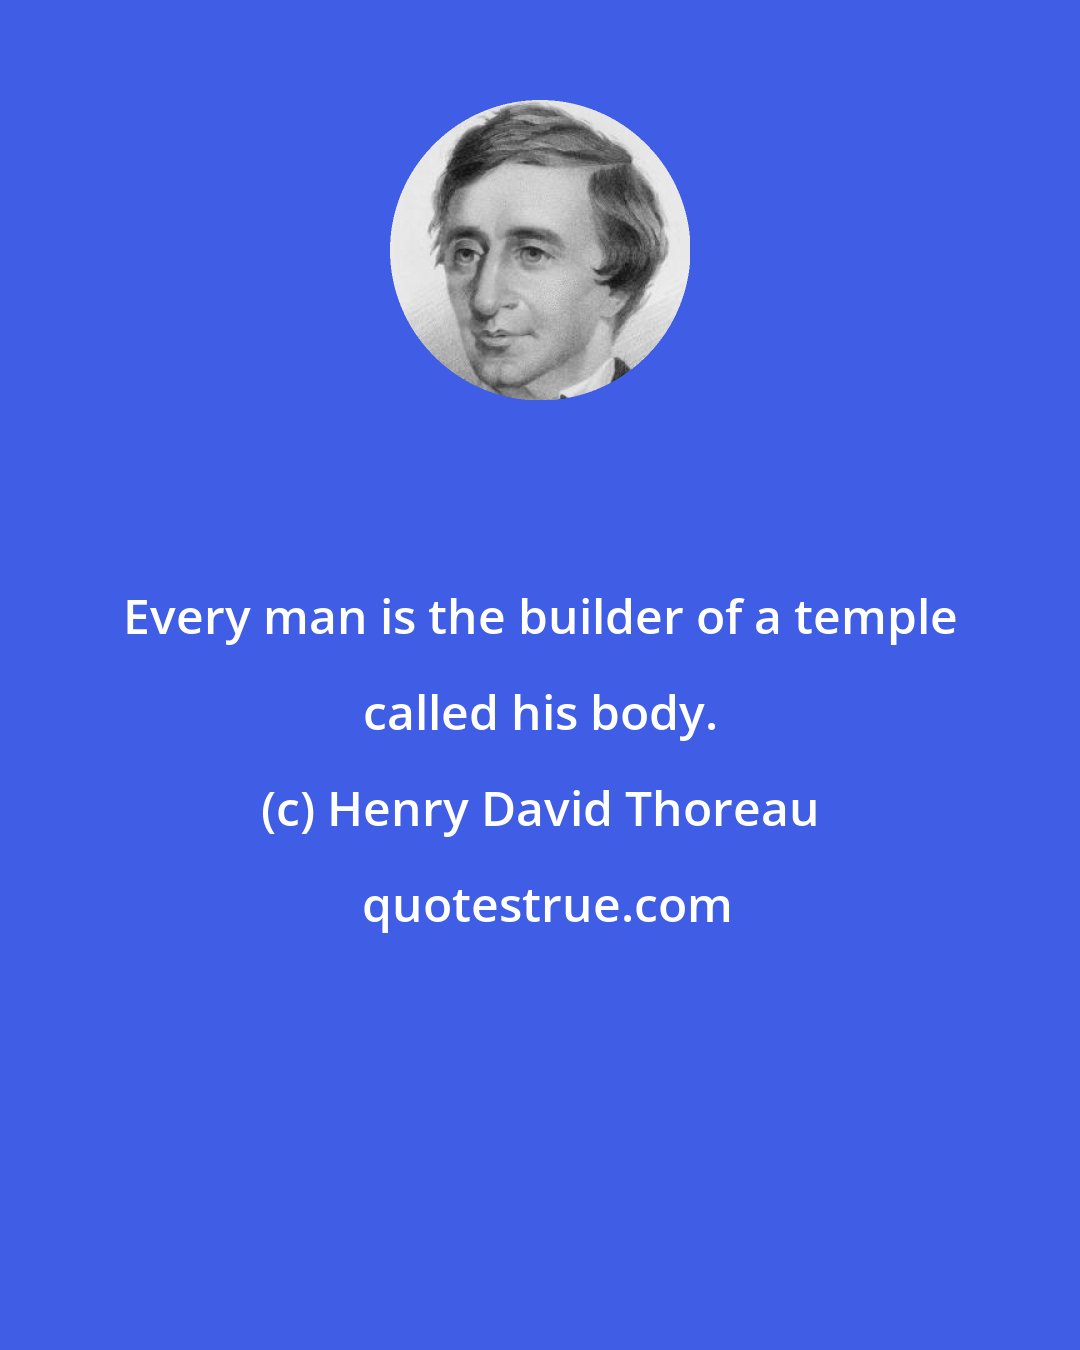 Henry David Thoreau: Every man is the builder of a temple called his body.